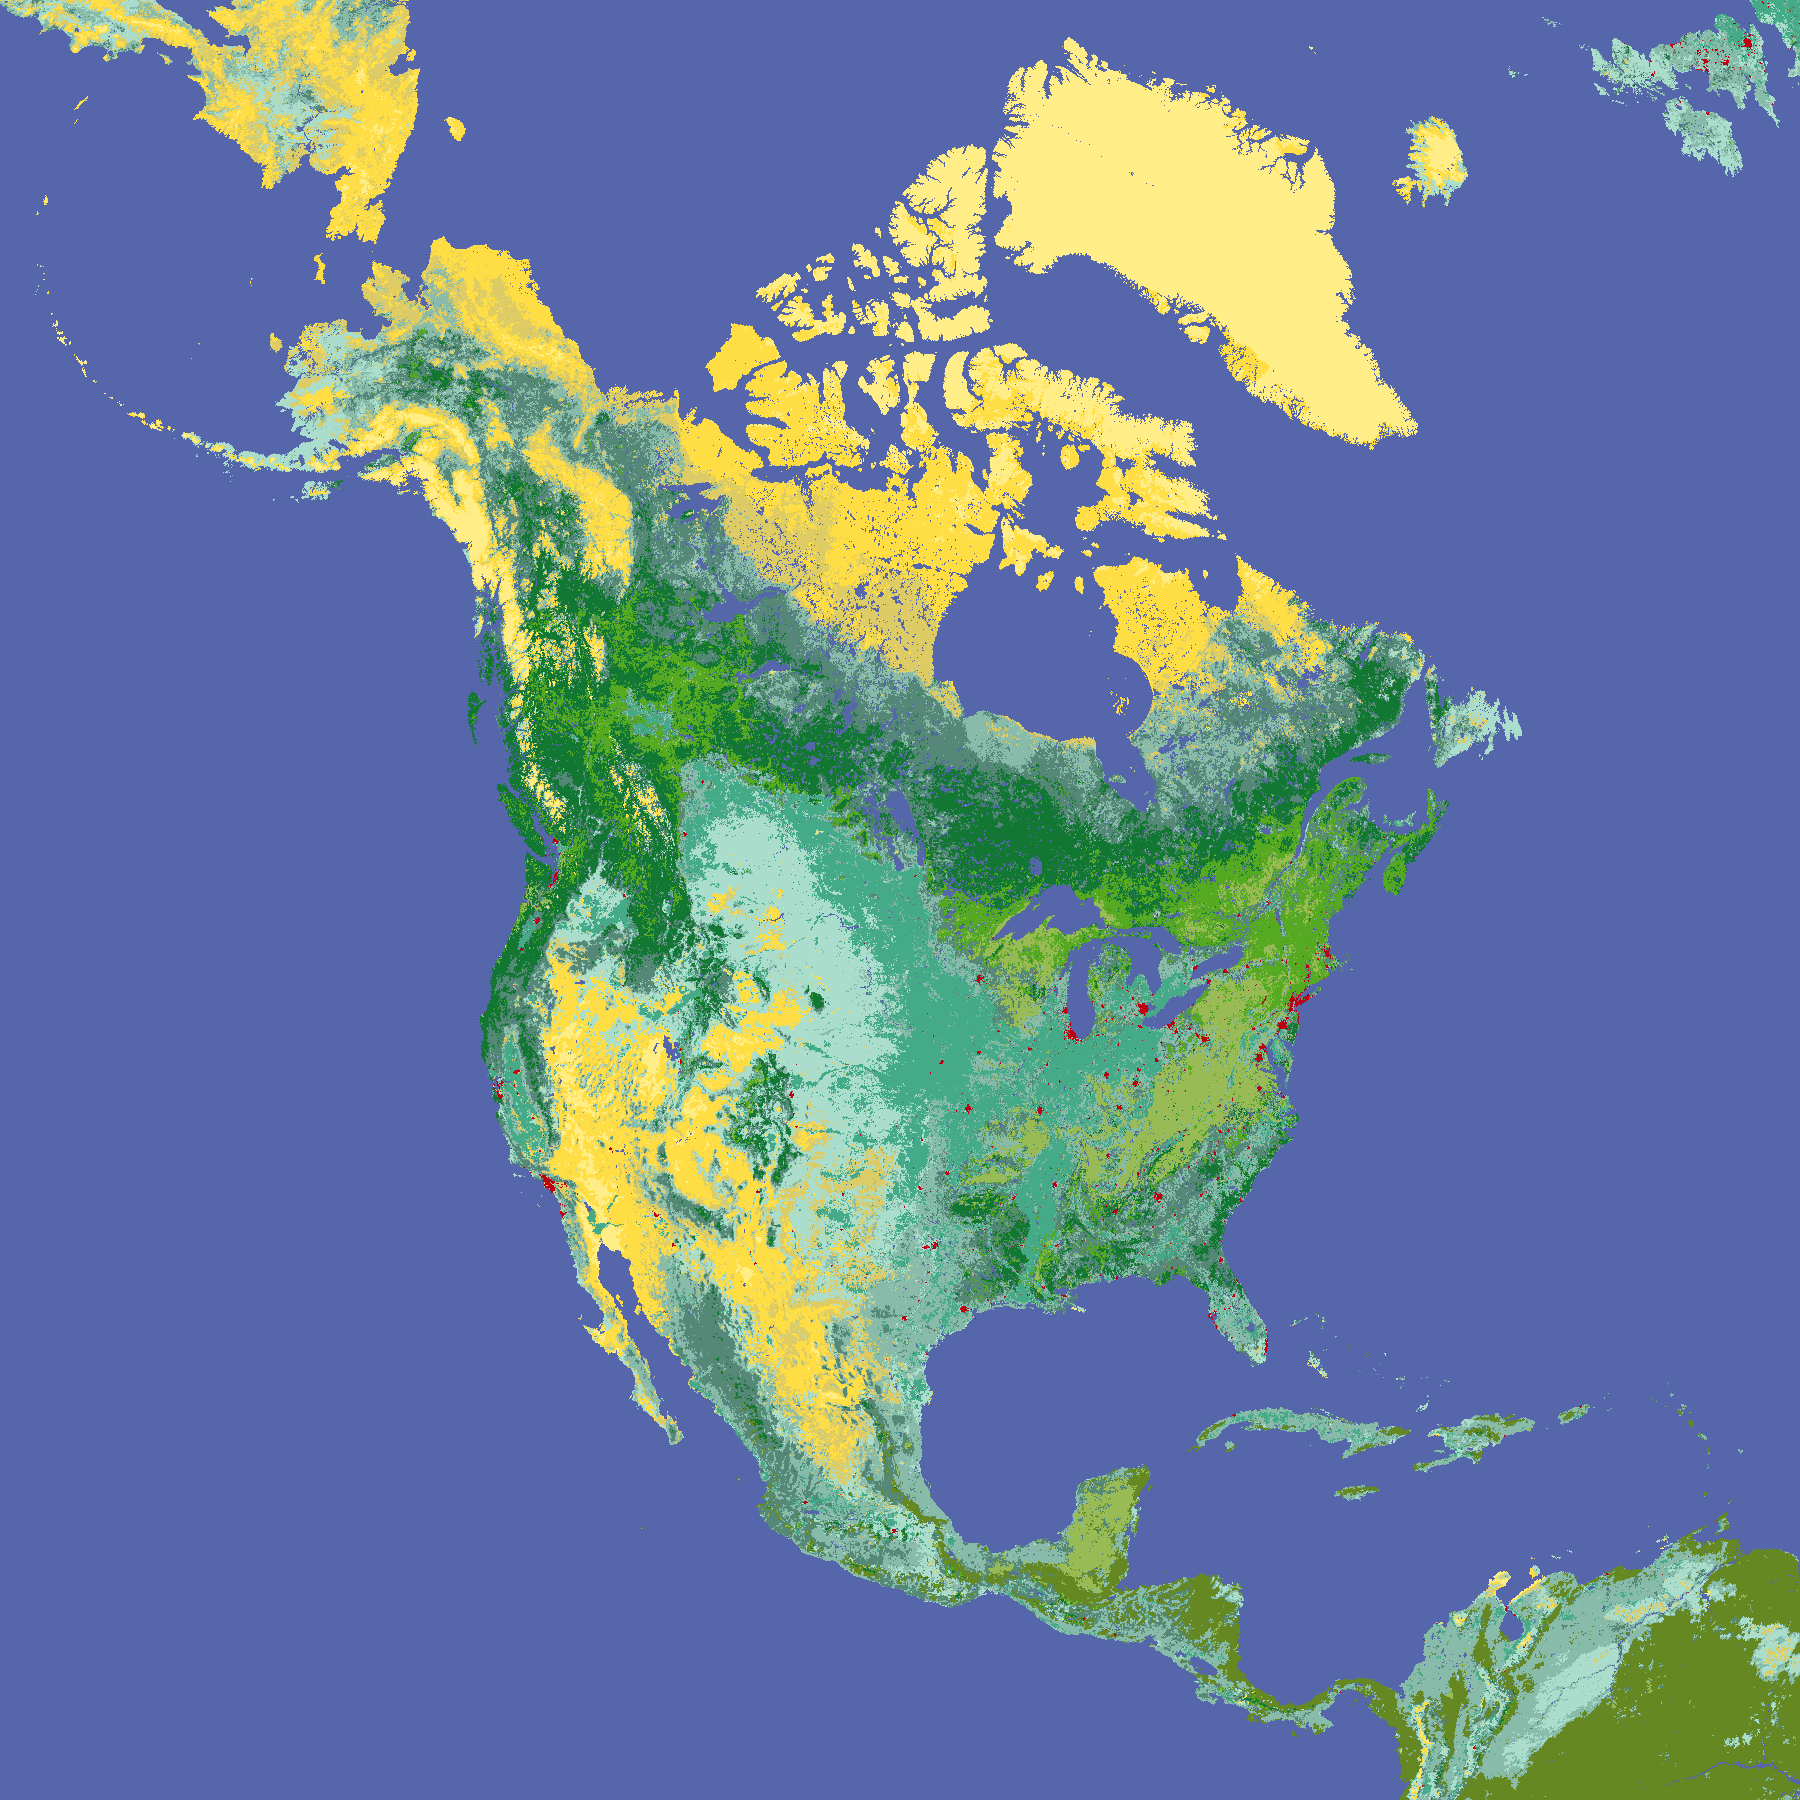 Global land cover classification in North America